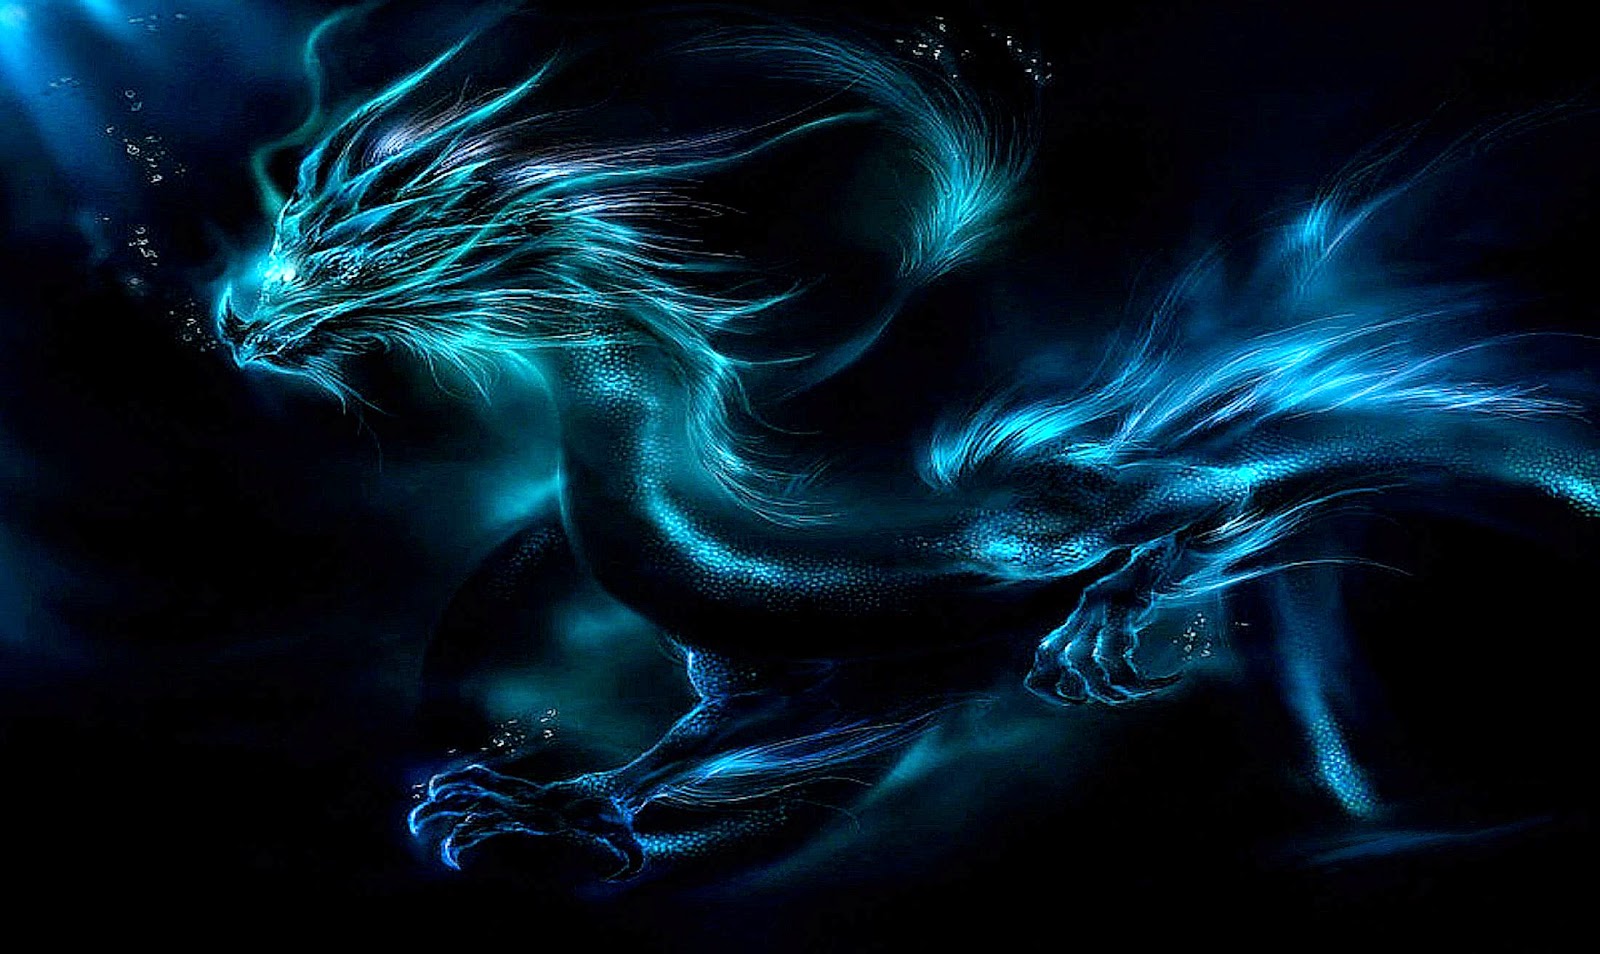 Free Dragons Wallpapers Dragons Images for Desktop